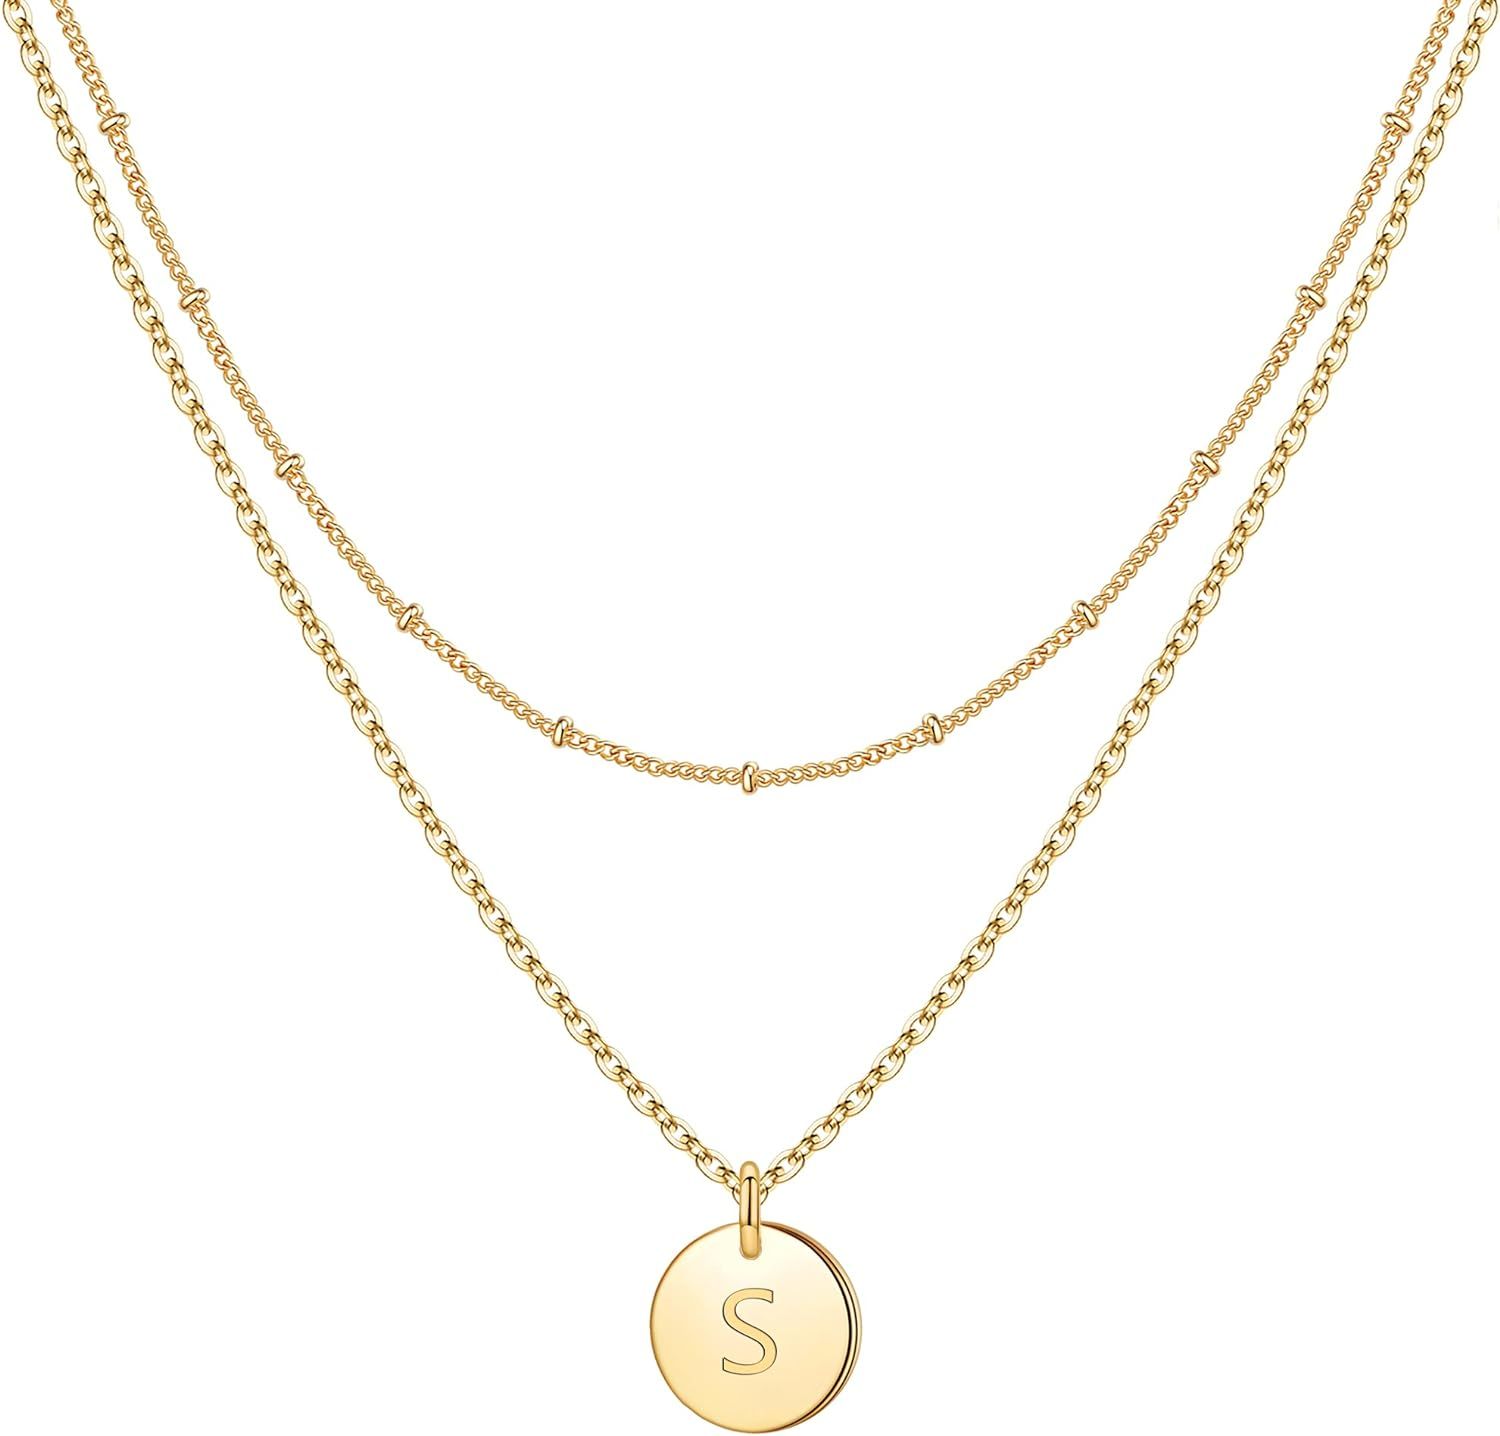 Gold Initial Necklaces for Women,14K Gold Filled Double Side Engraved Hammered Gold Coin Necklaces f | Amazon (US)